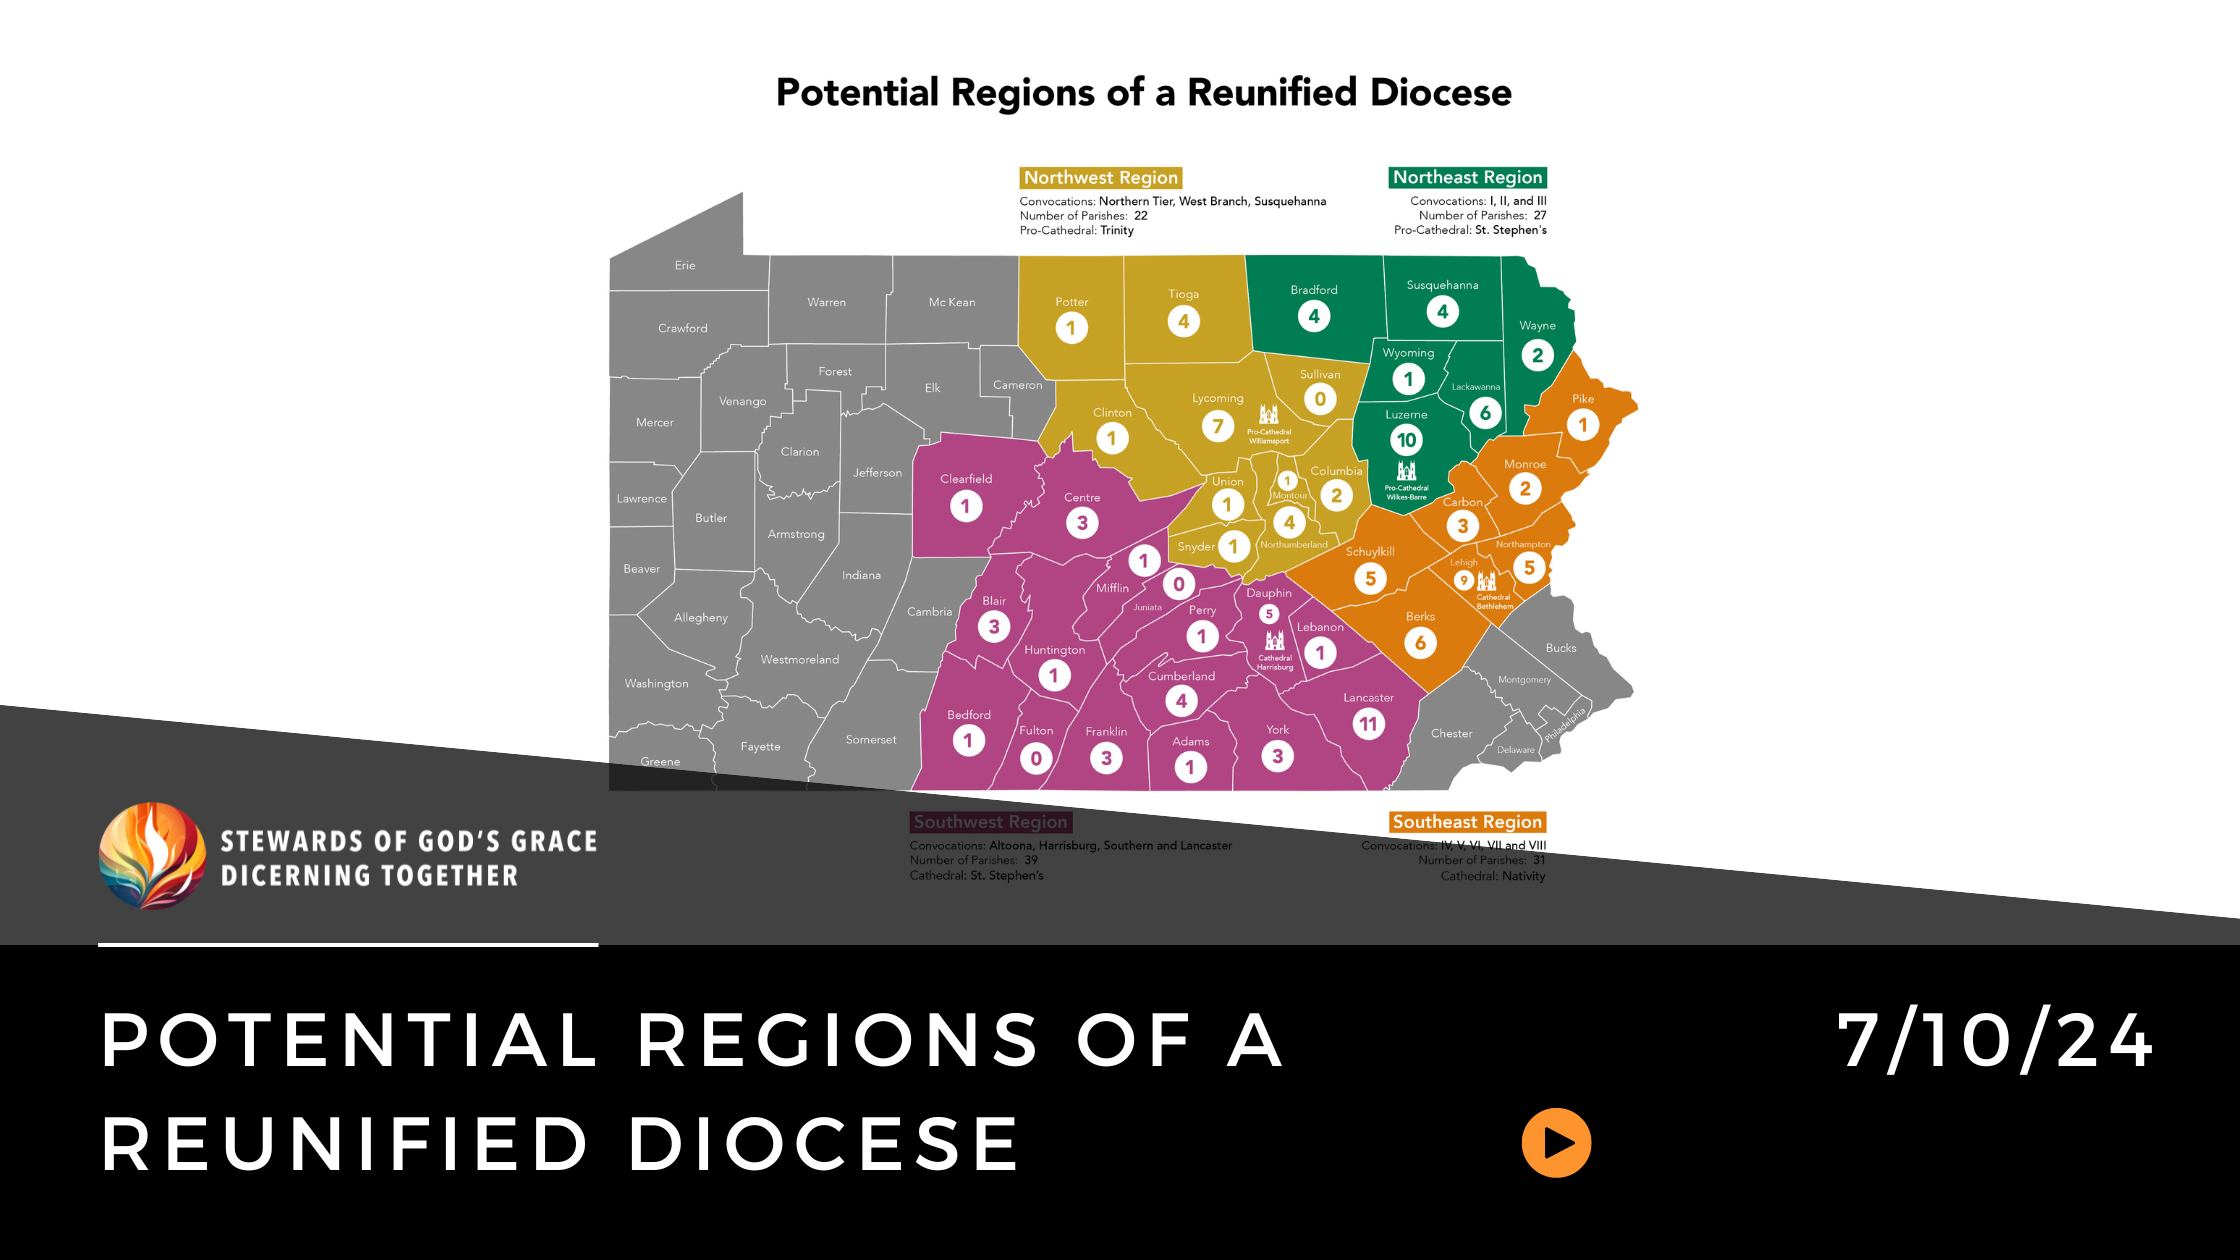 A map of PA and its Possible Regions of Unified Diocese